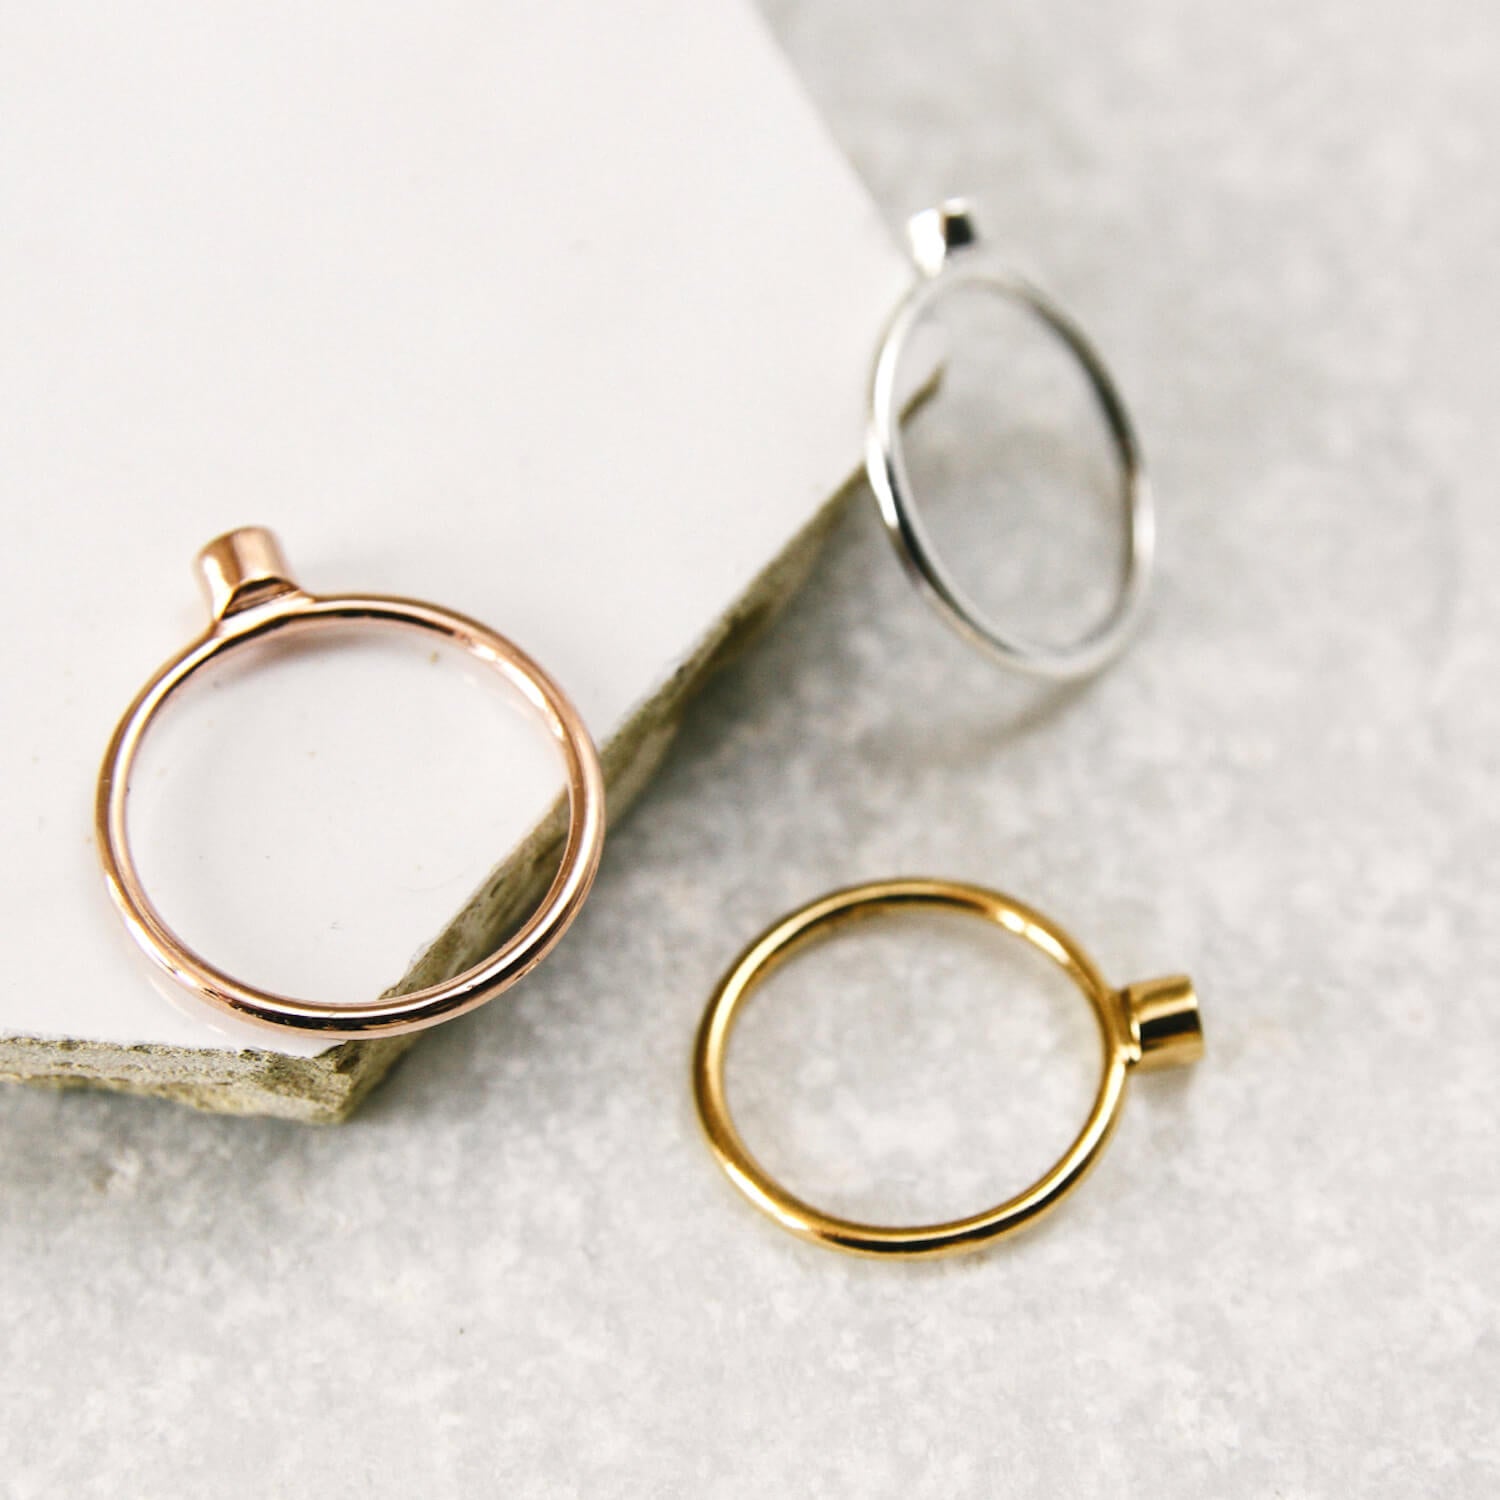 Three simple gold, rose gold and silver dot rings by matthew calvin photographed on a hexagonal tile